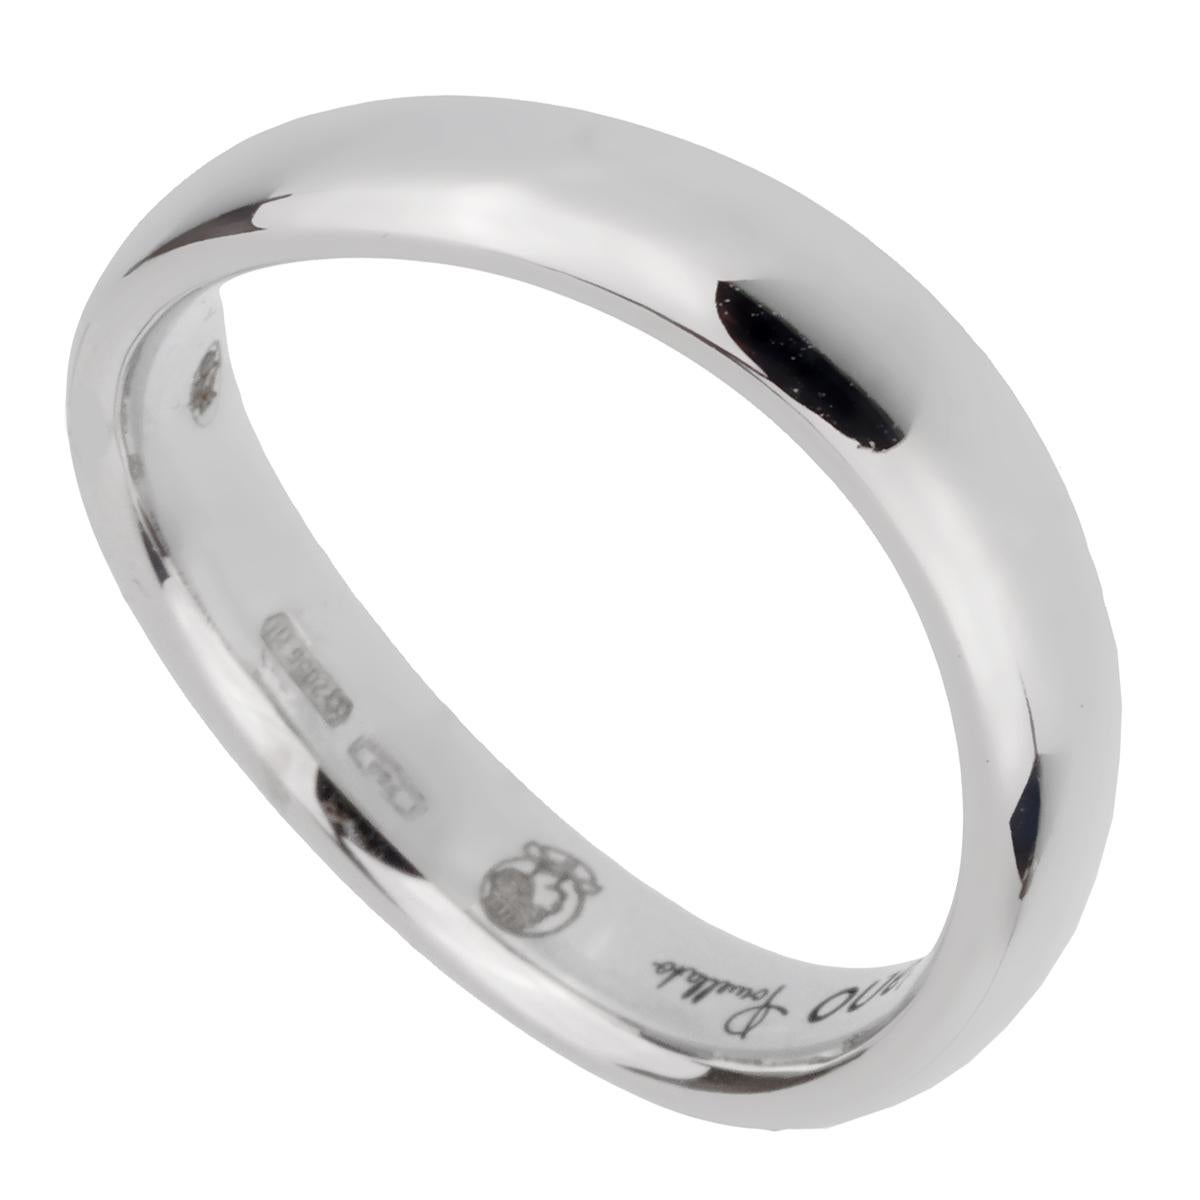 A chic Pomellato wave style band crafted in 18k white gold, the ring measures a size 5.5 and can be resized.

Pomellato Retail Price: $1350
Sku: 2399